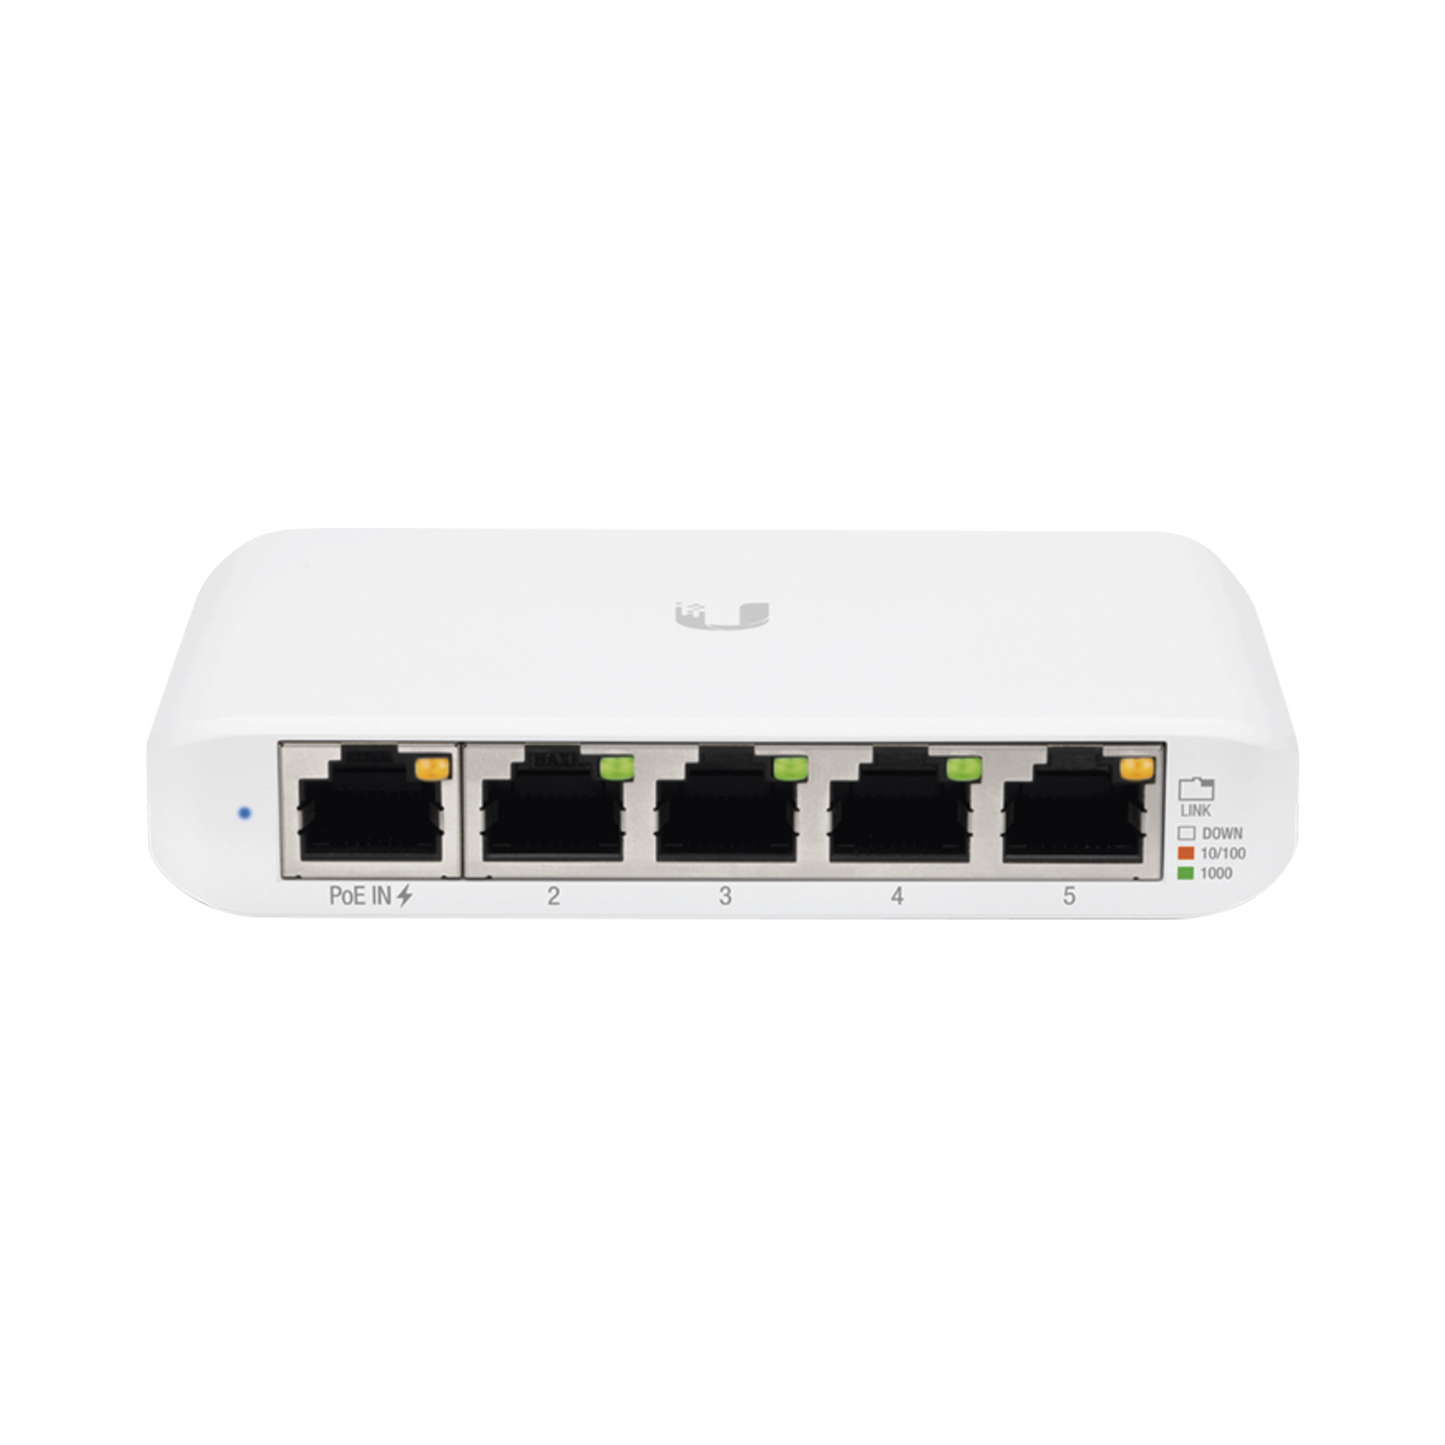 UniFi Compact 5-Port Gigabit Switch, one port also supports 802.3af/at PoE input